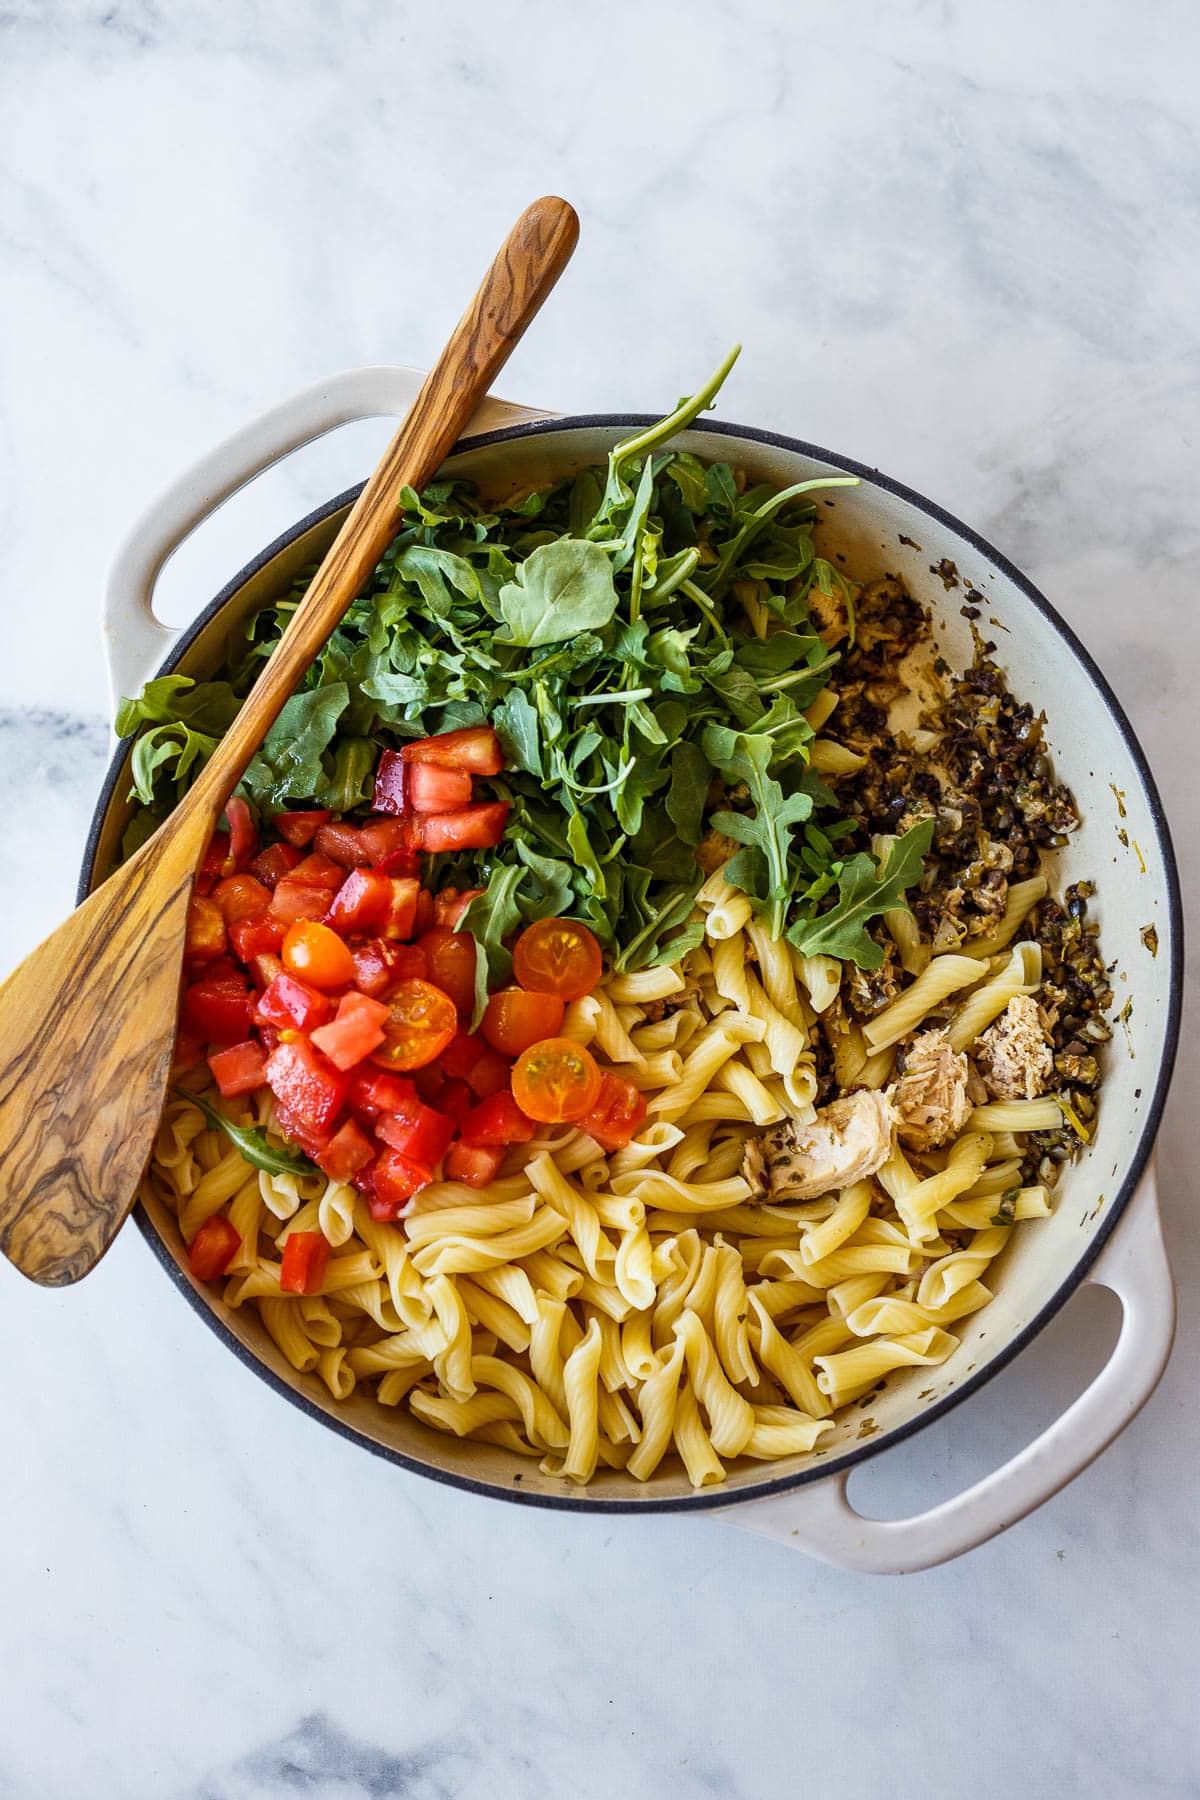 mixing pasta with tomatoes, tuna, olive tapenade and arugula